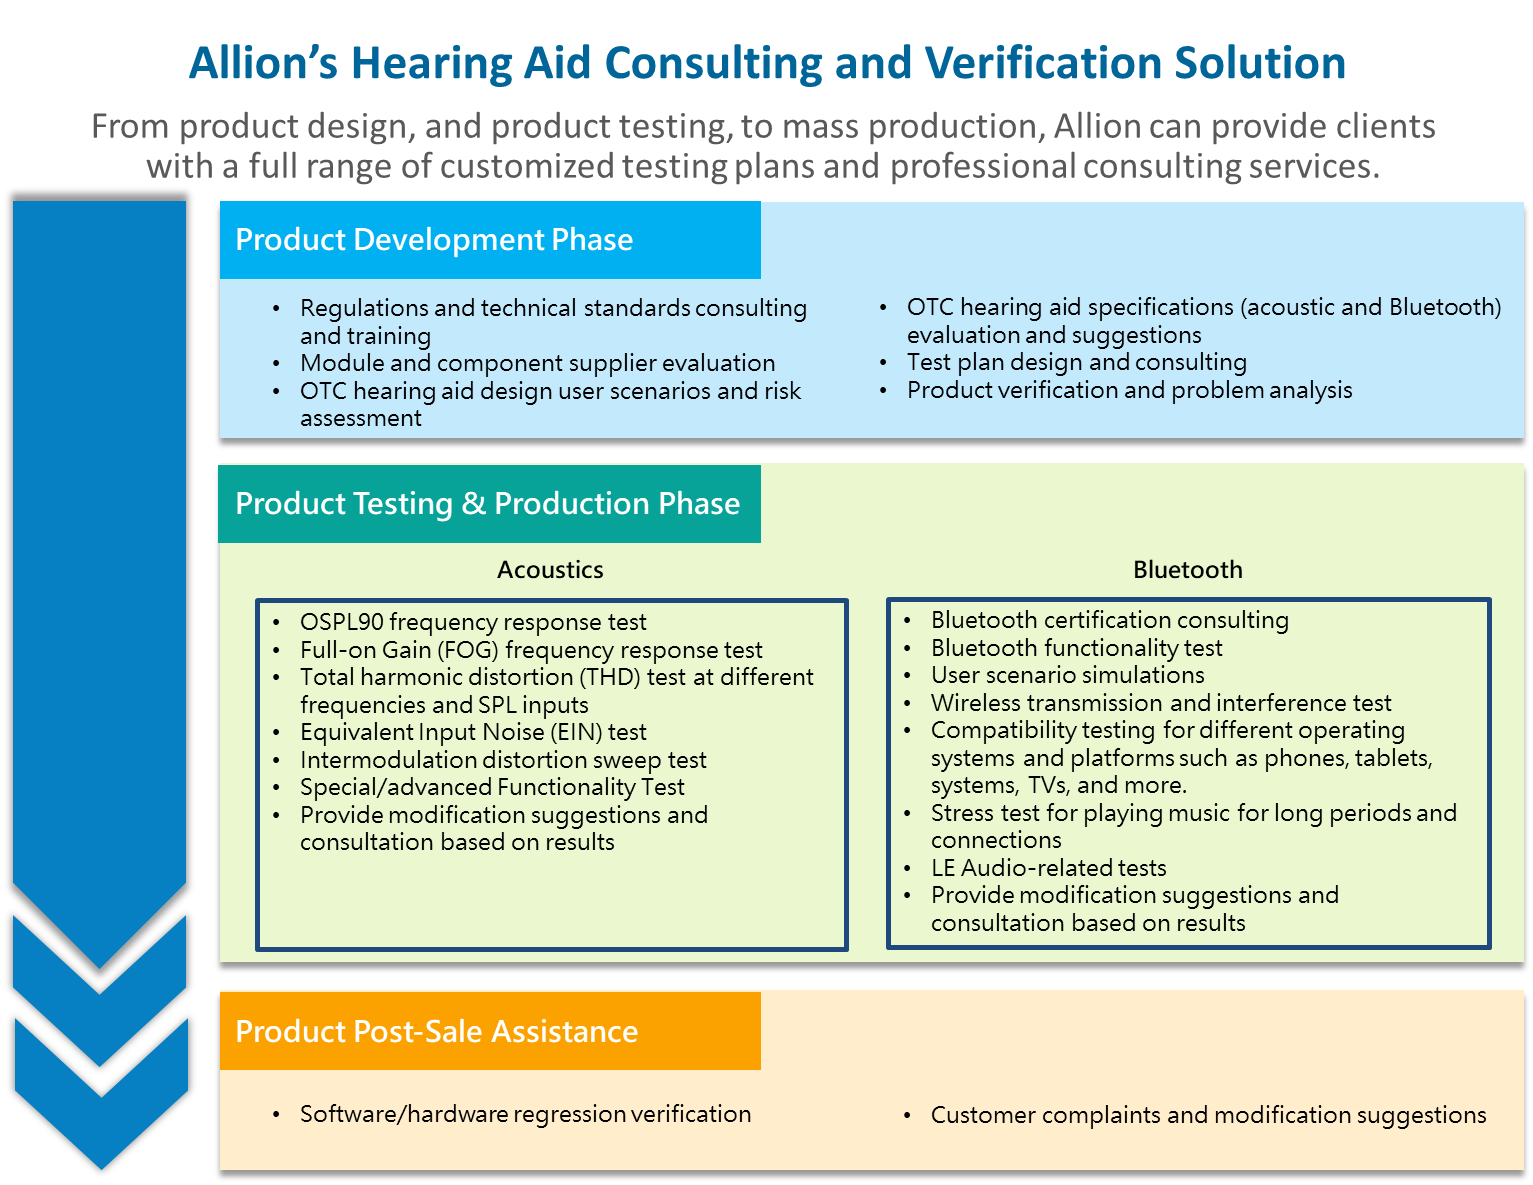 Allion’s Hearing Aid Consulting and Verification Solution